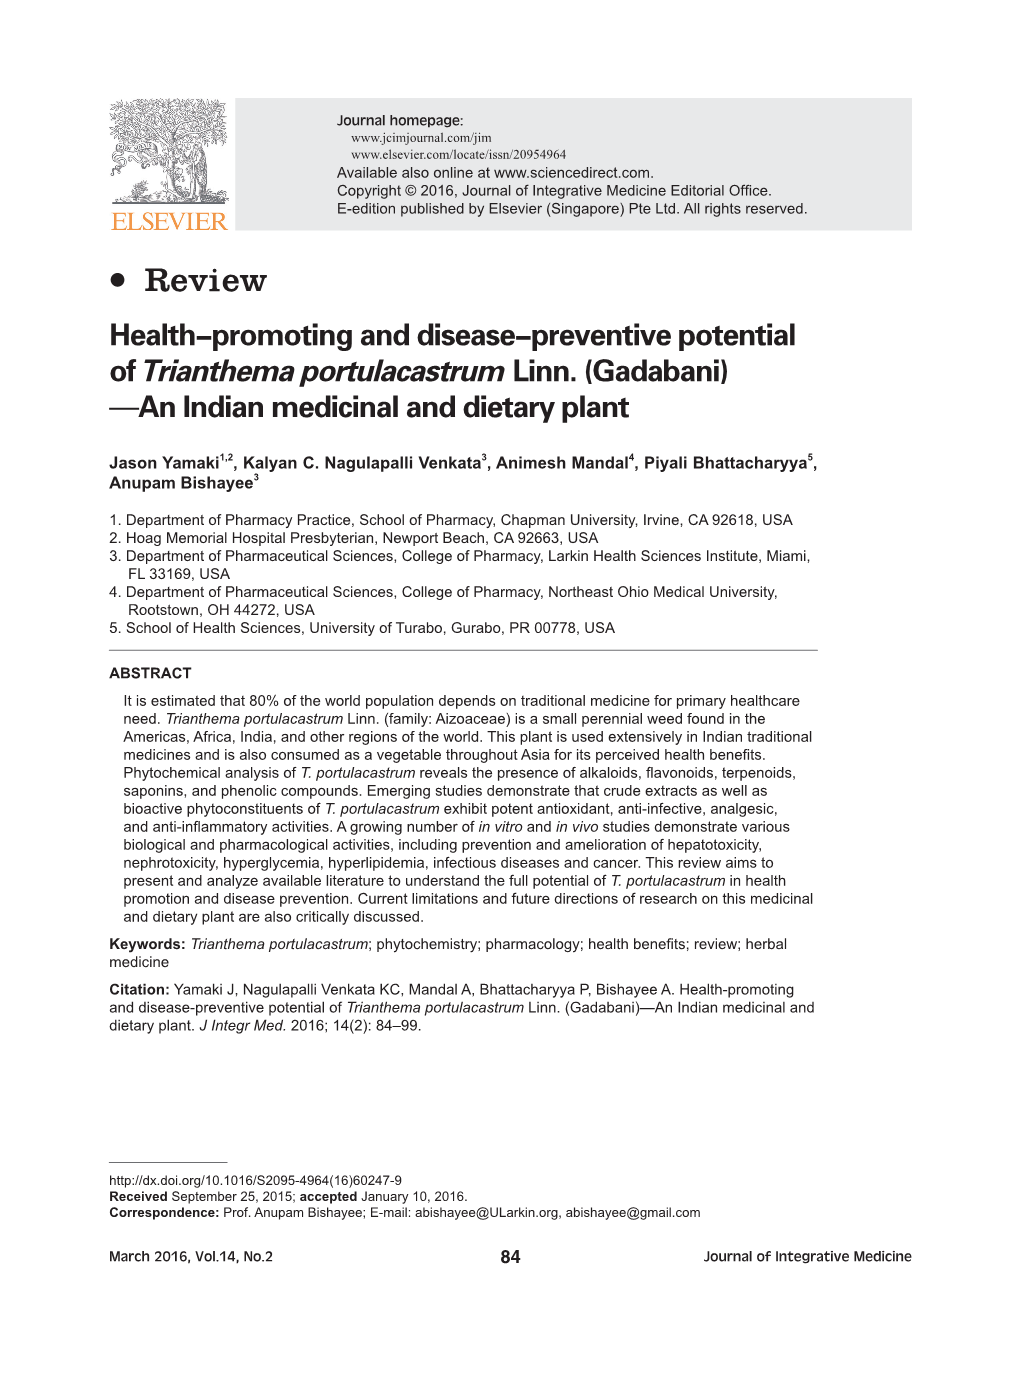 Review Health-Promoting and Disease-Preventive Potential of Trianthema Portulacastrum Linn